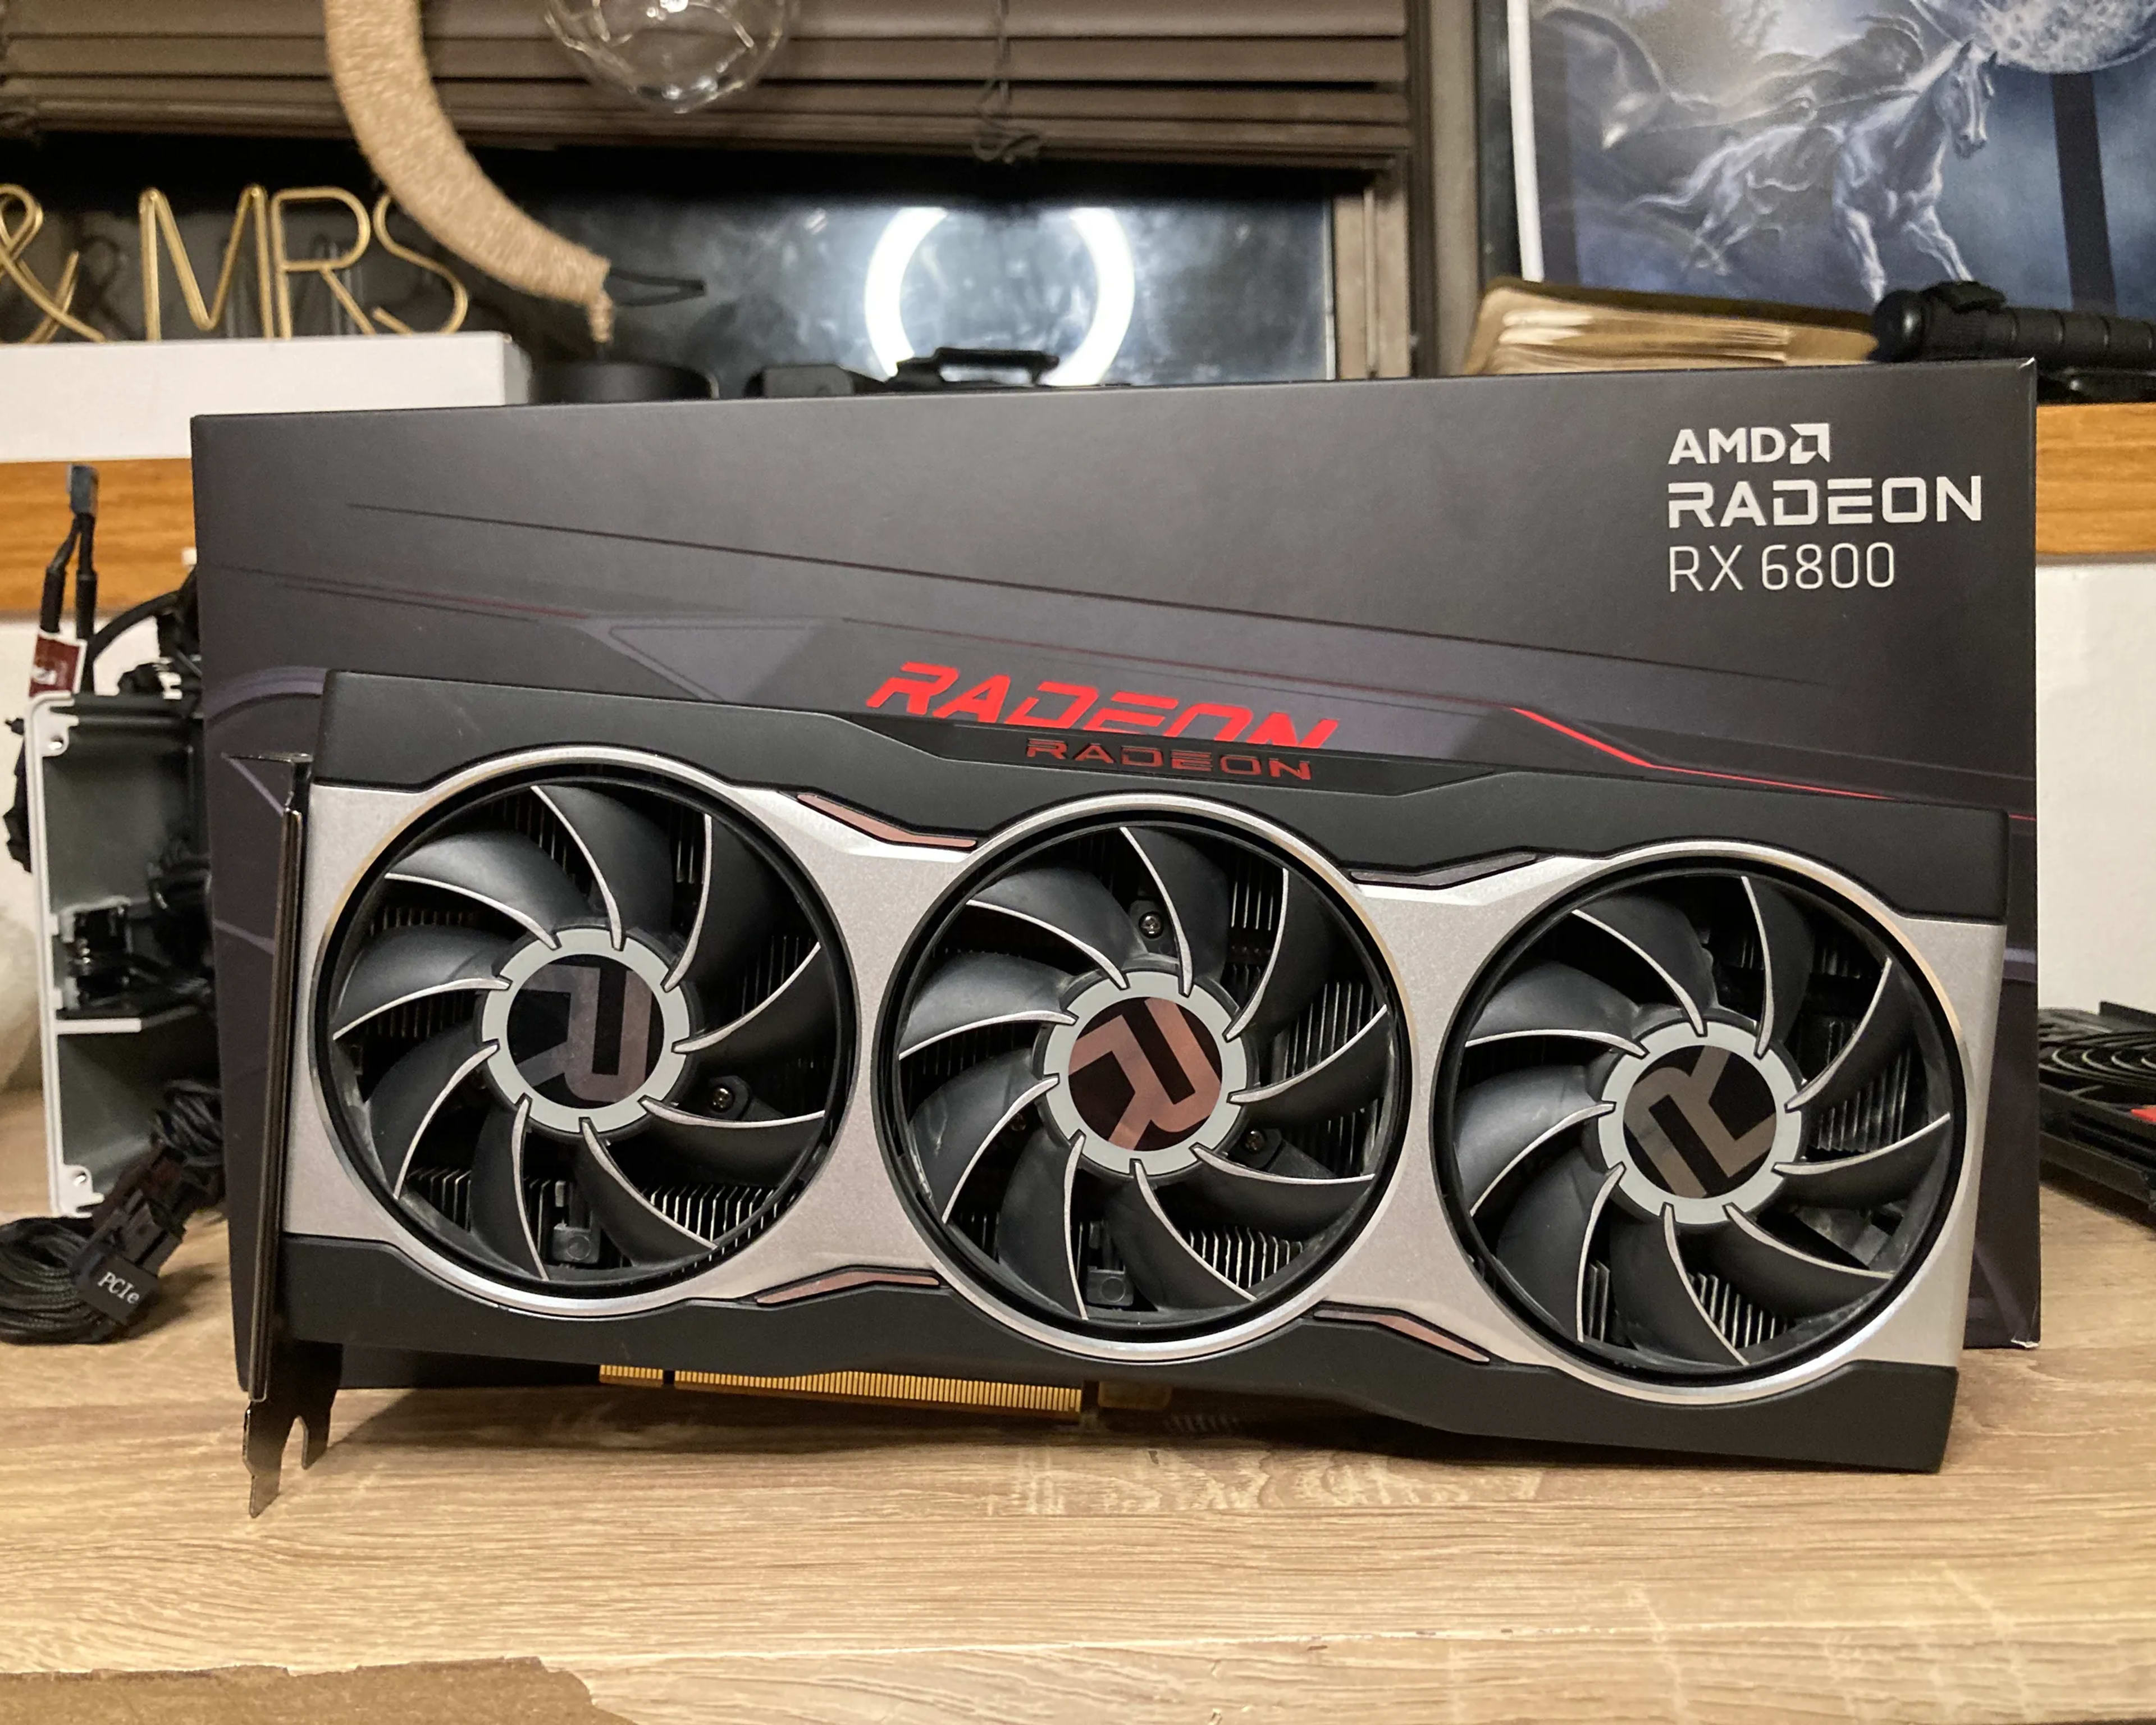 AMD RX 6800 Reference Edition 16GB GDDR6 Graphics Card